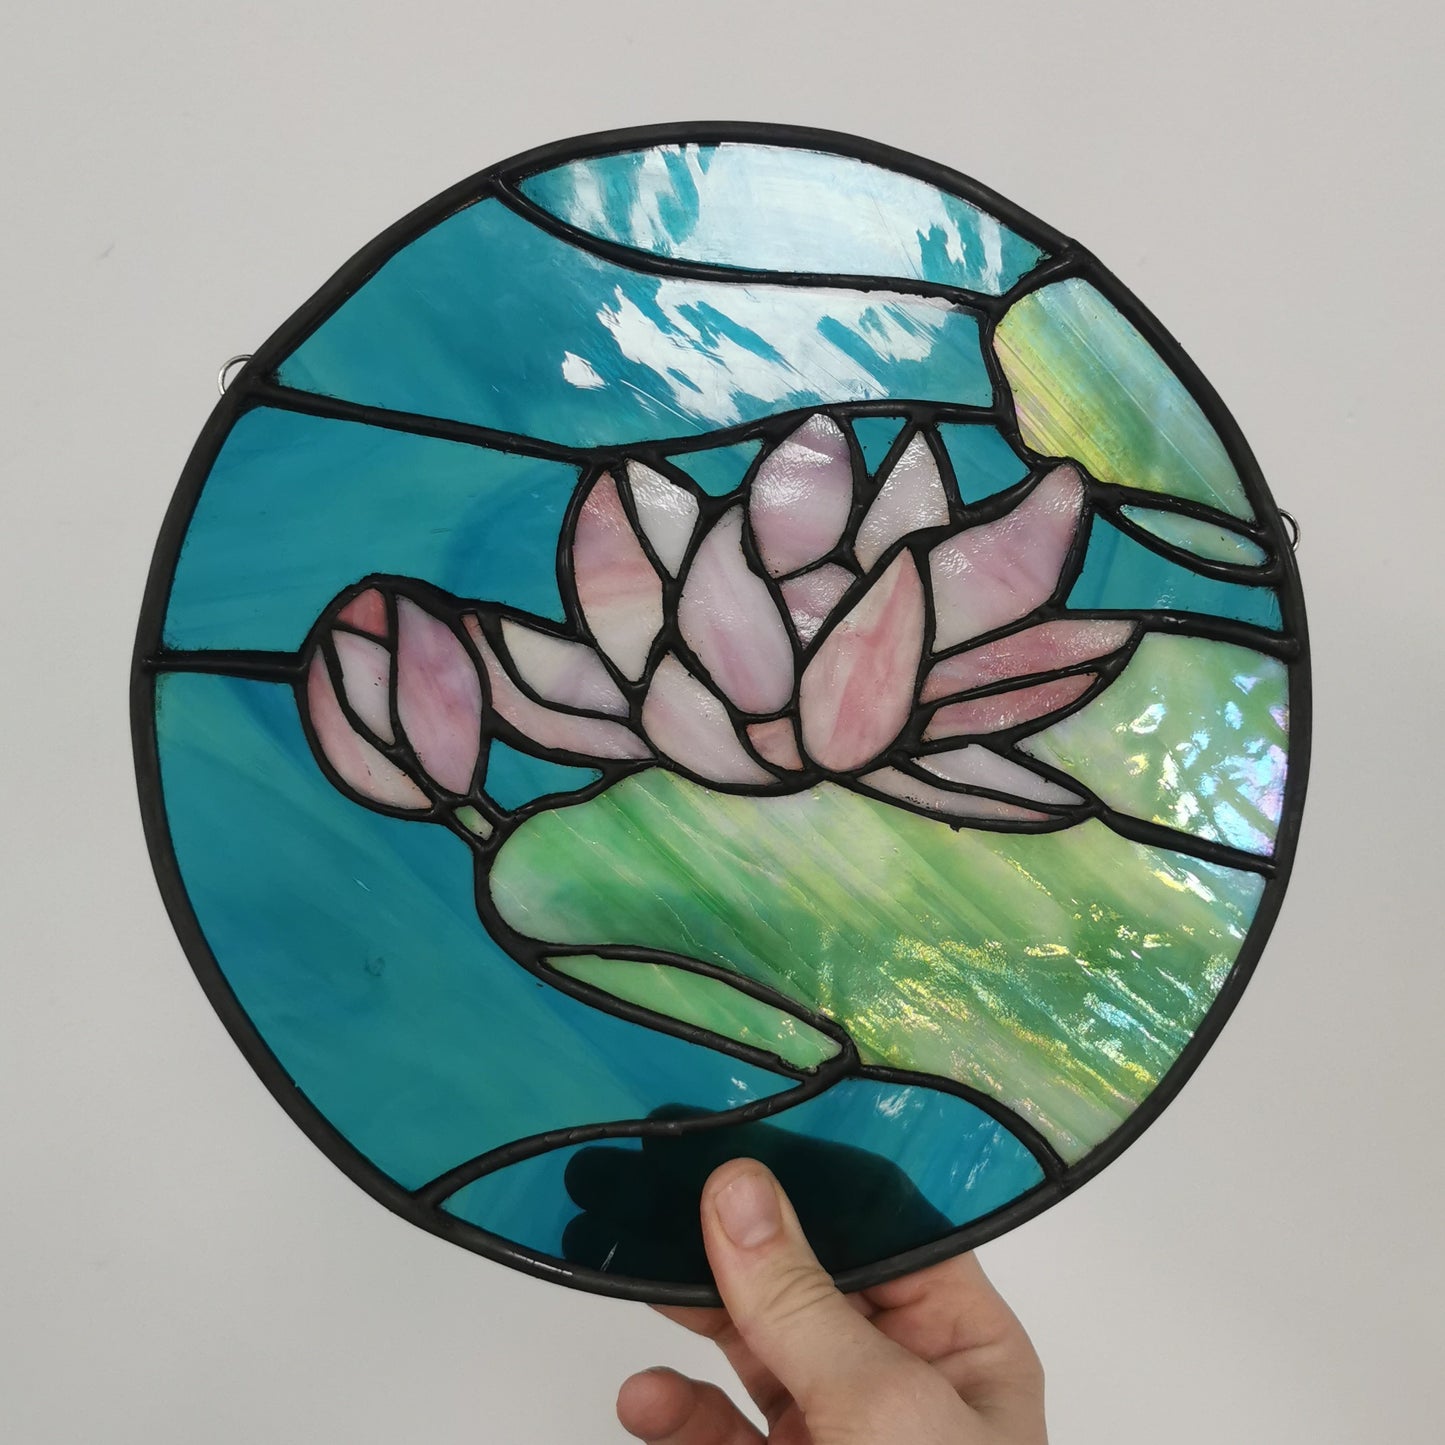 Saturday morning - Beginners stained glass course